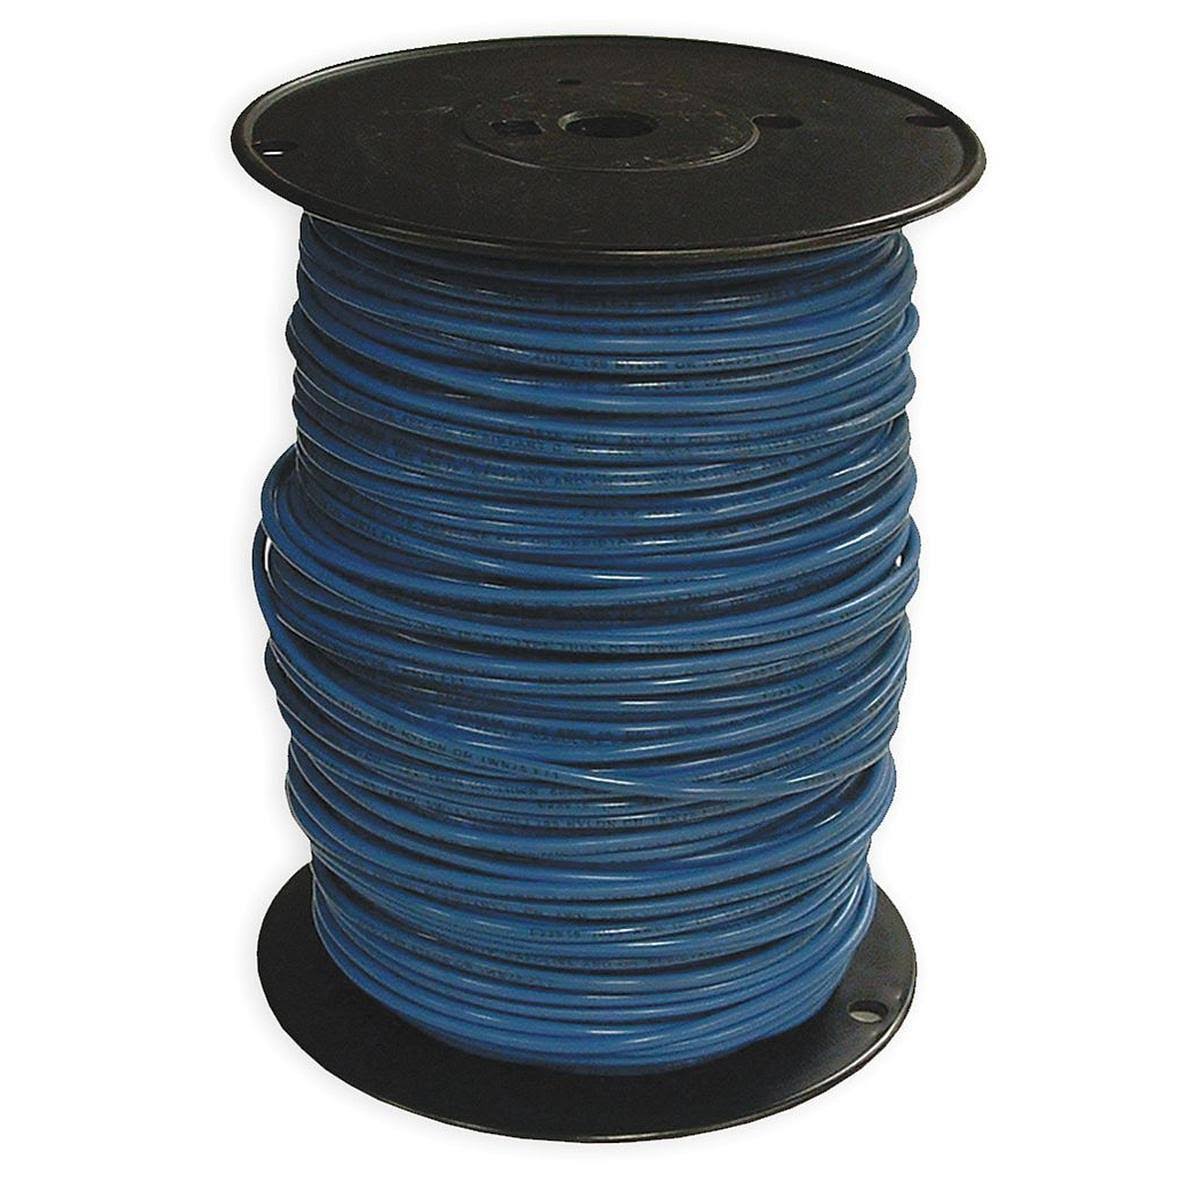 Southwire Company Building Wire - Blue, 500'